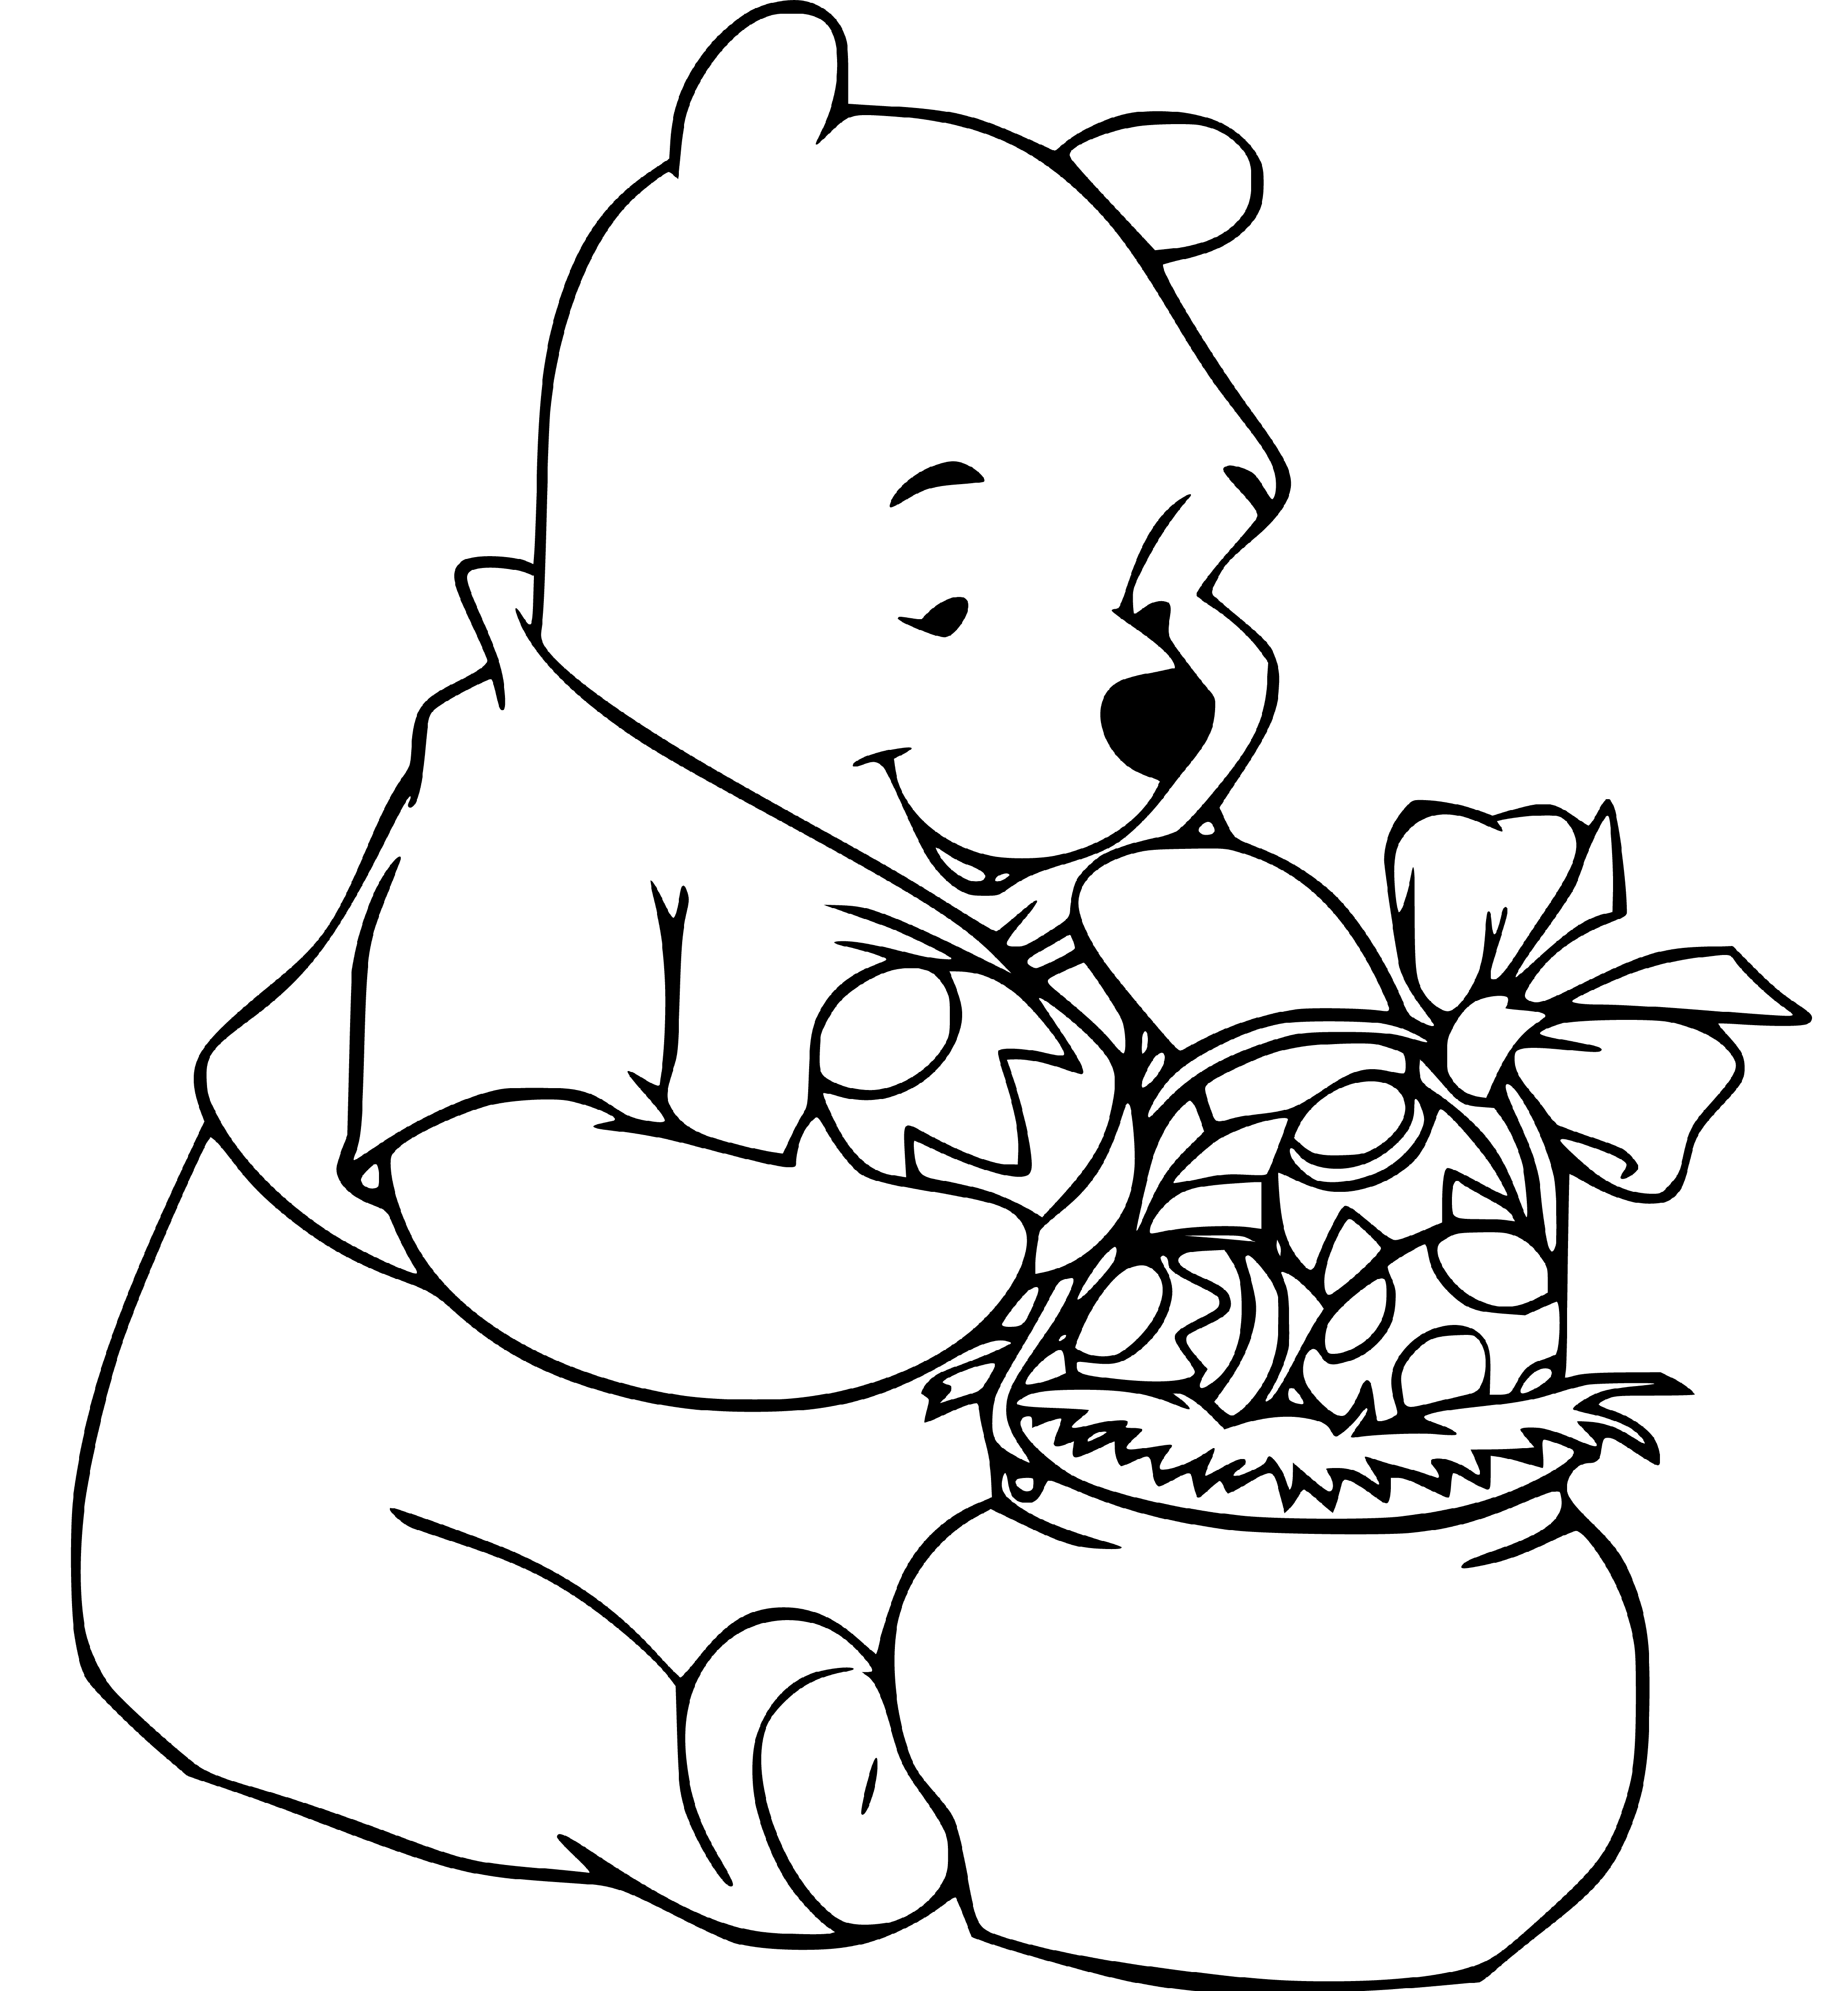 Winnie The Pooh Easter Day Coloring Sheet for Kids - SheetalColor.com